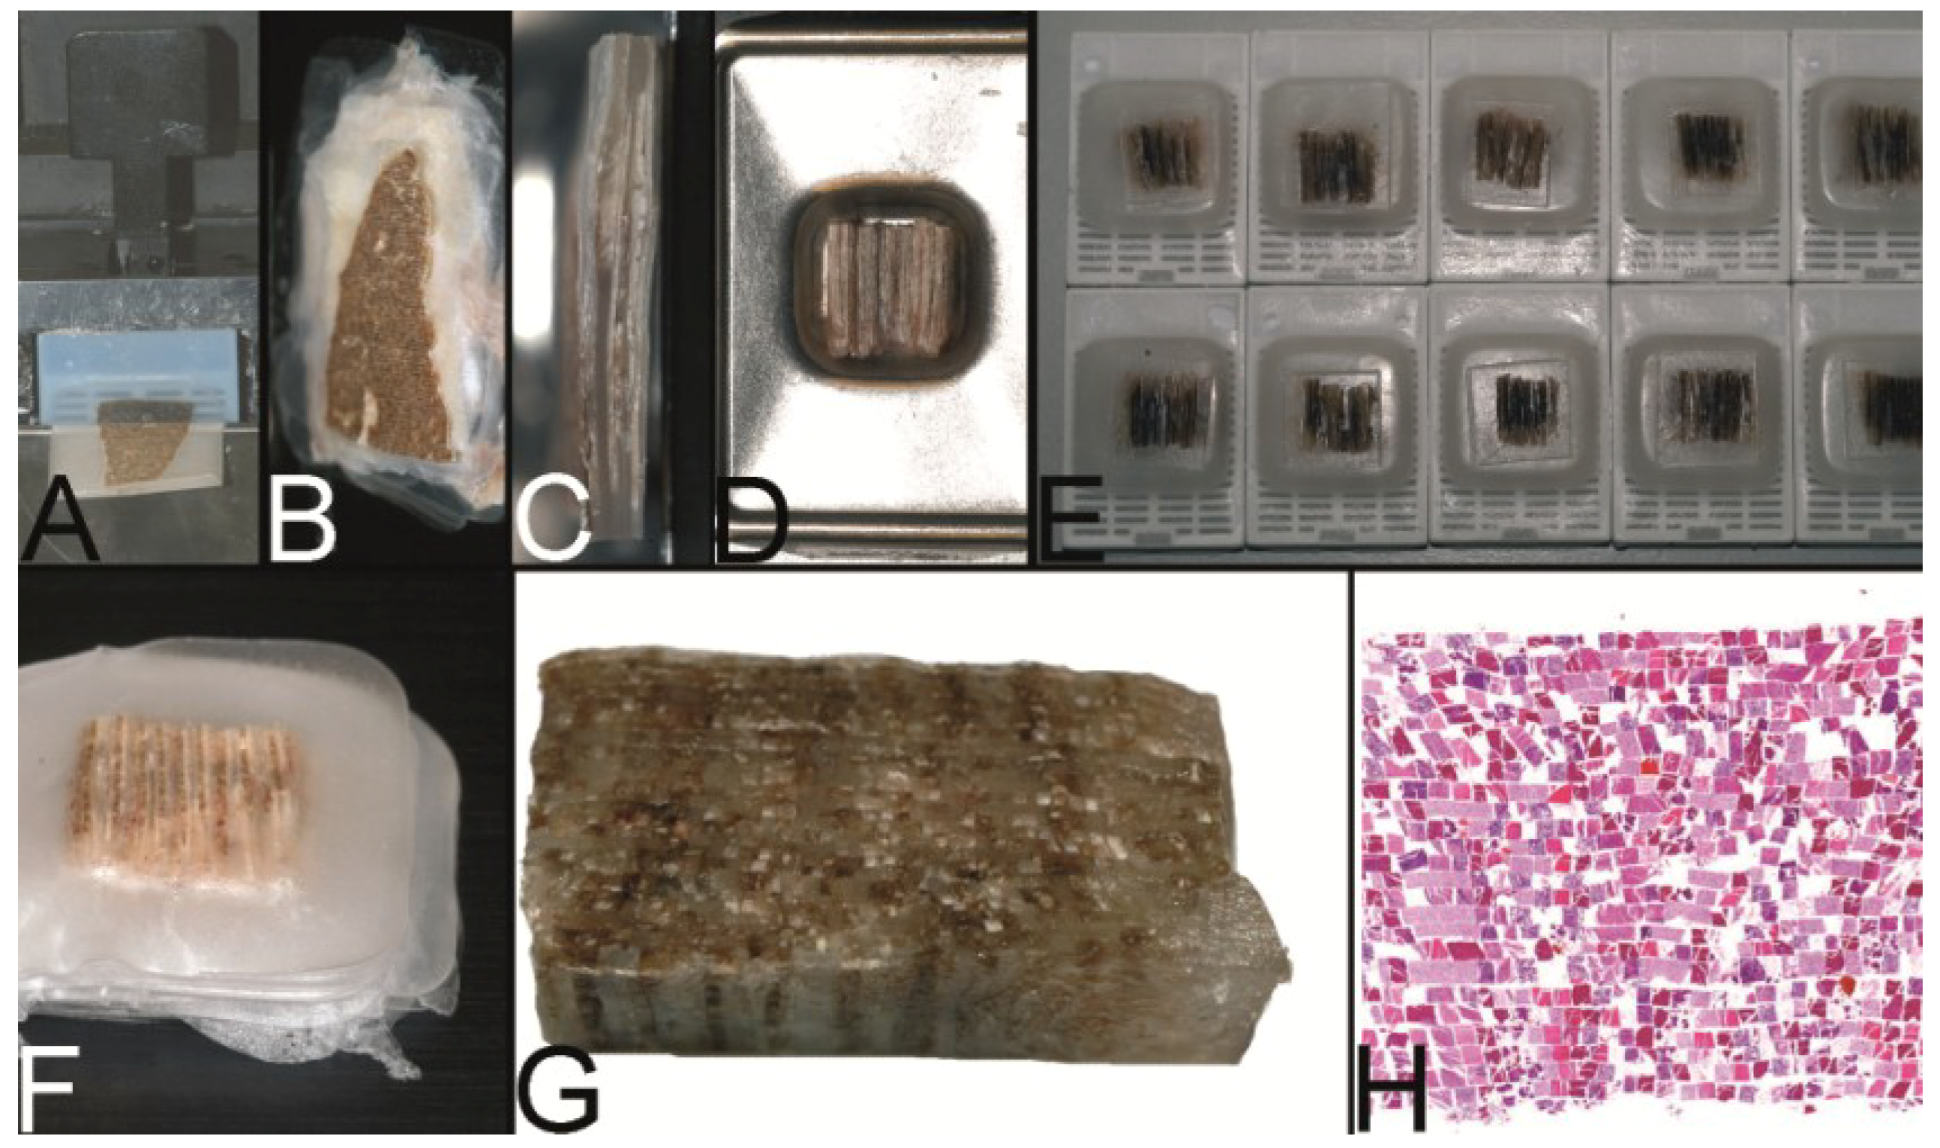 The resulting tissue microarray is covered upside down with melted